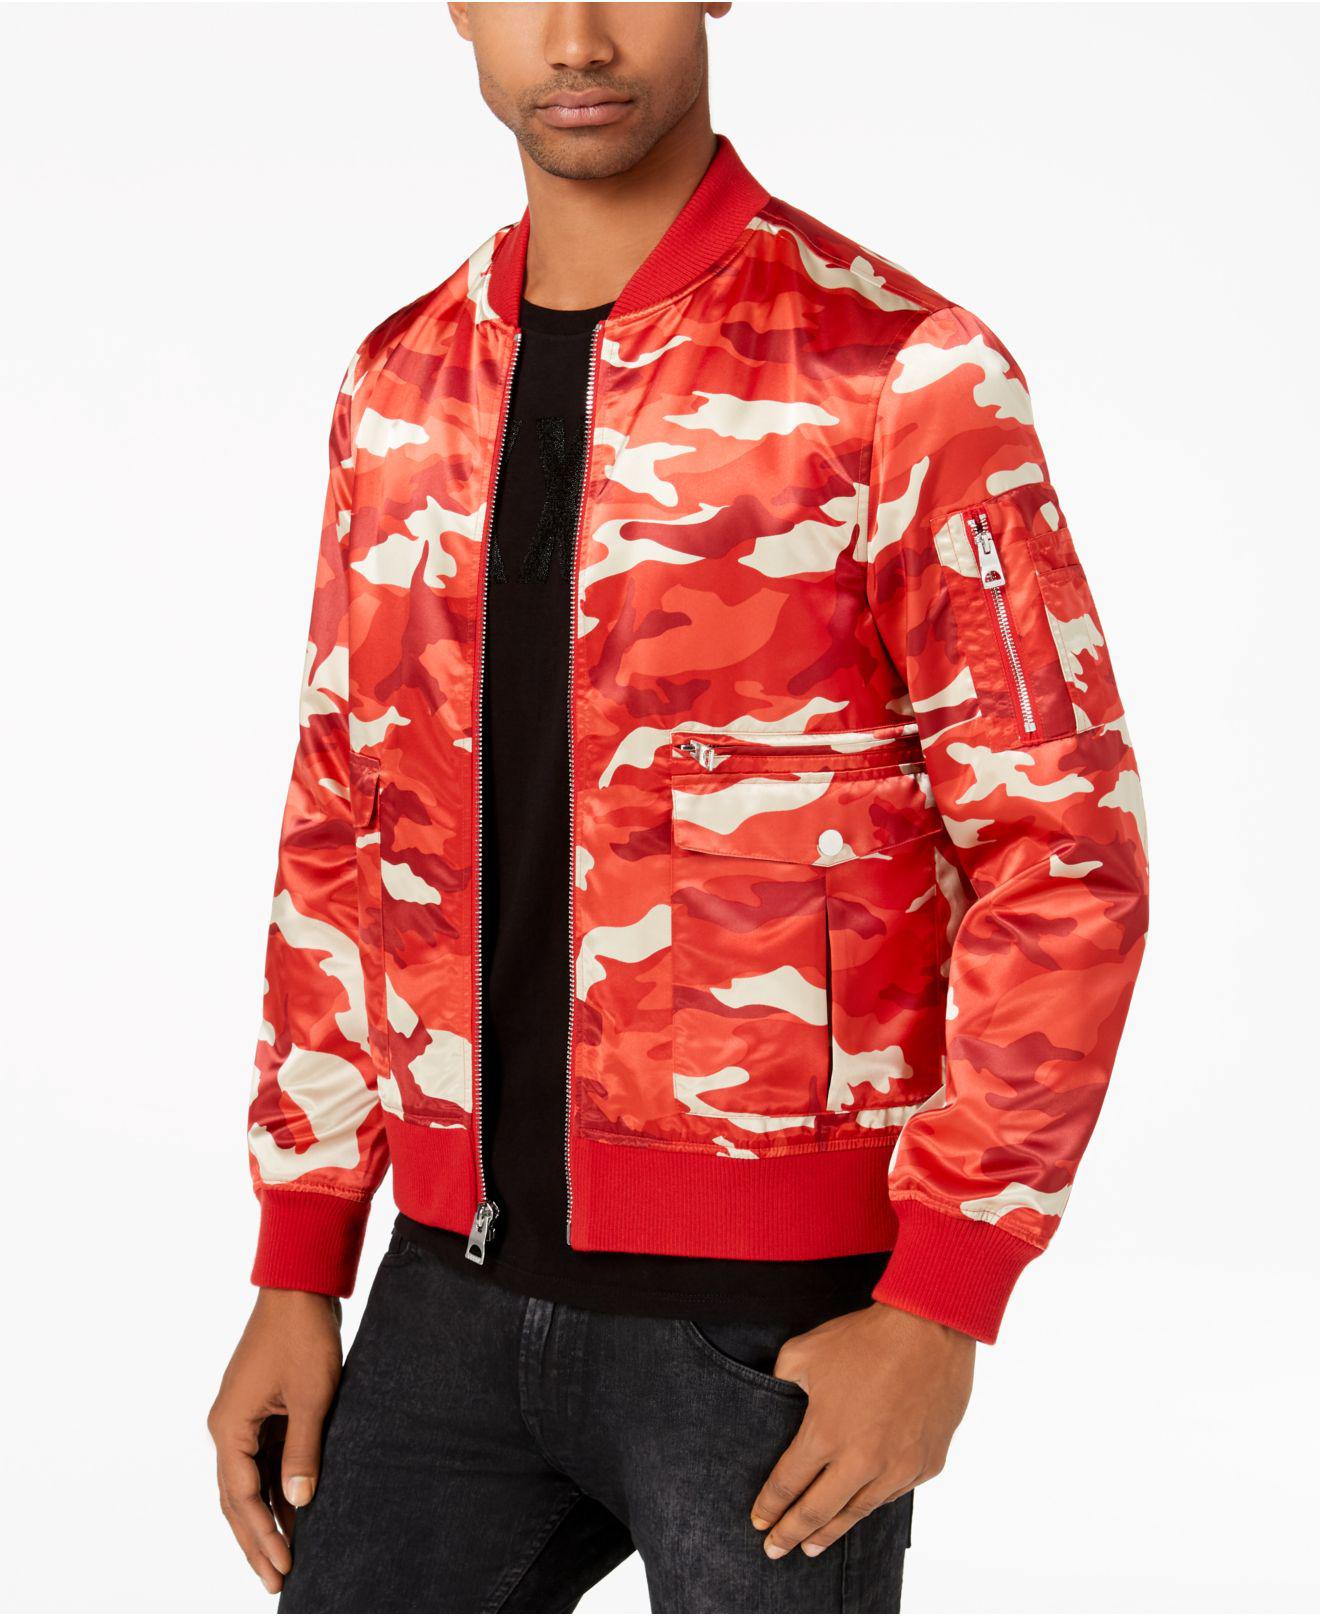 Guess Synthetic Camo Bomber Jacket in Red for Men - Lyst